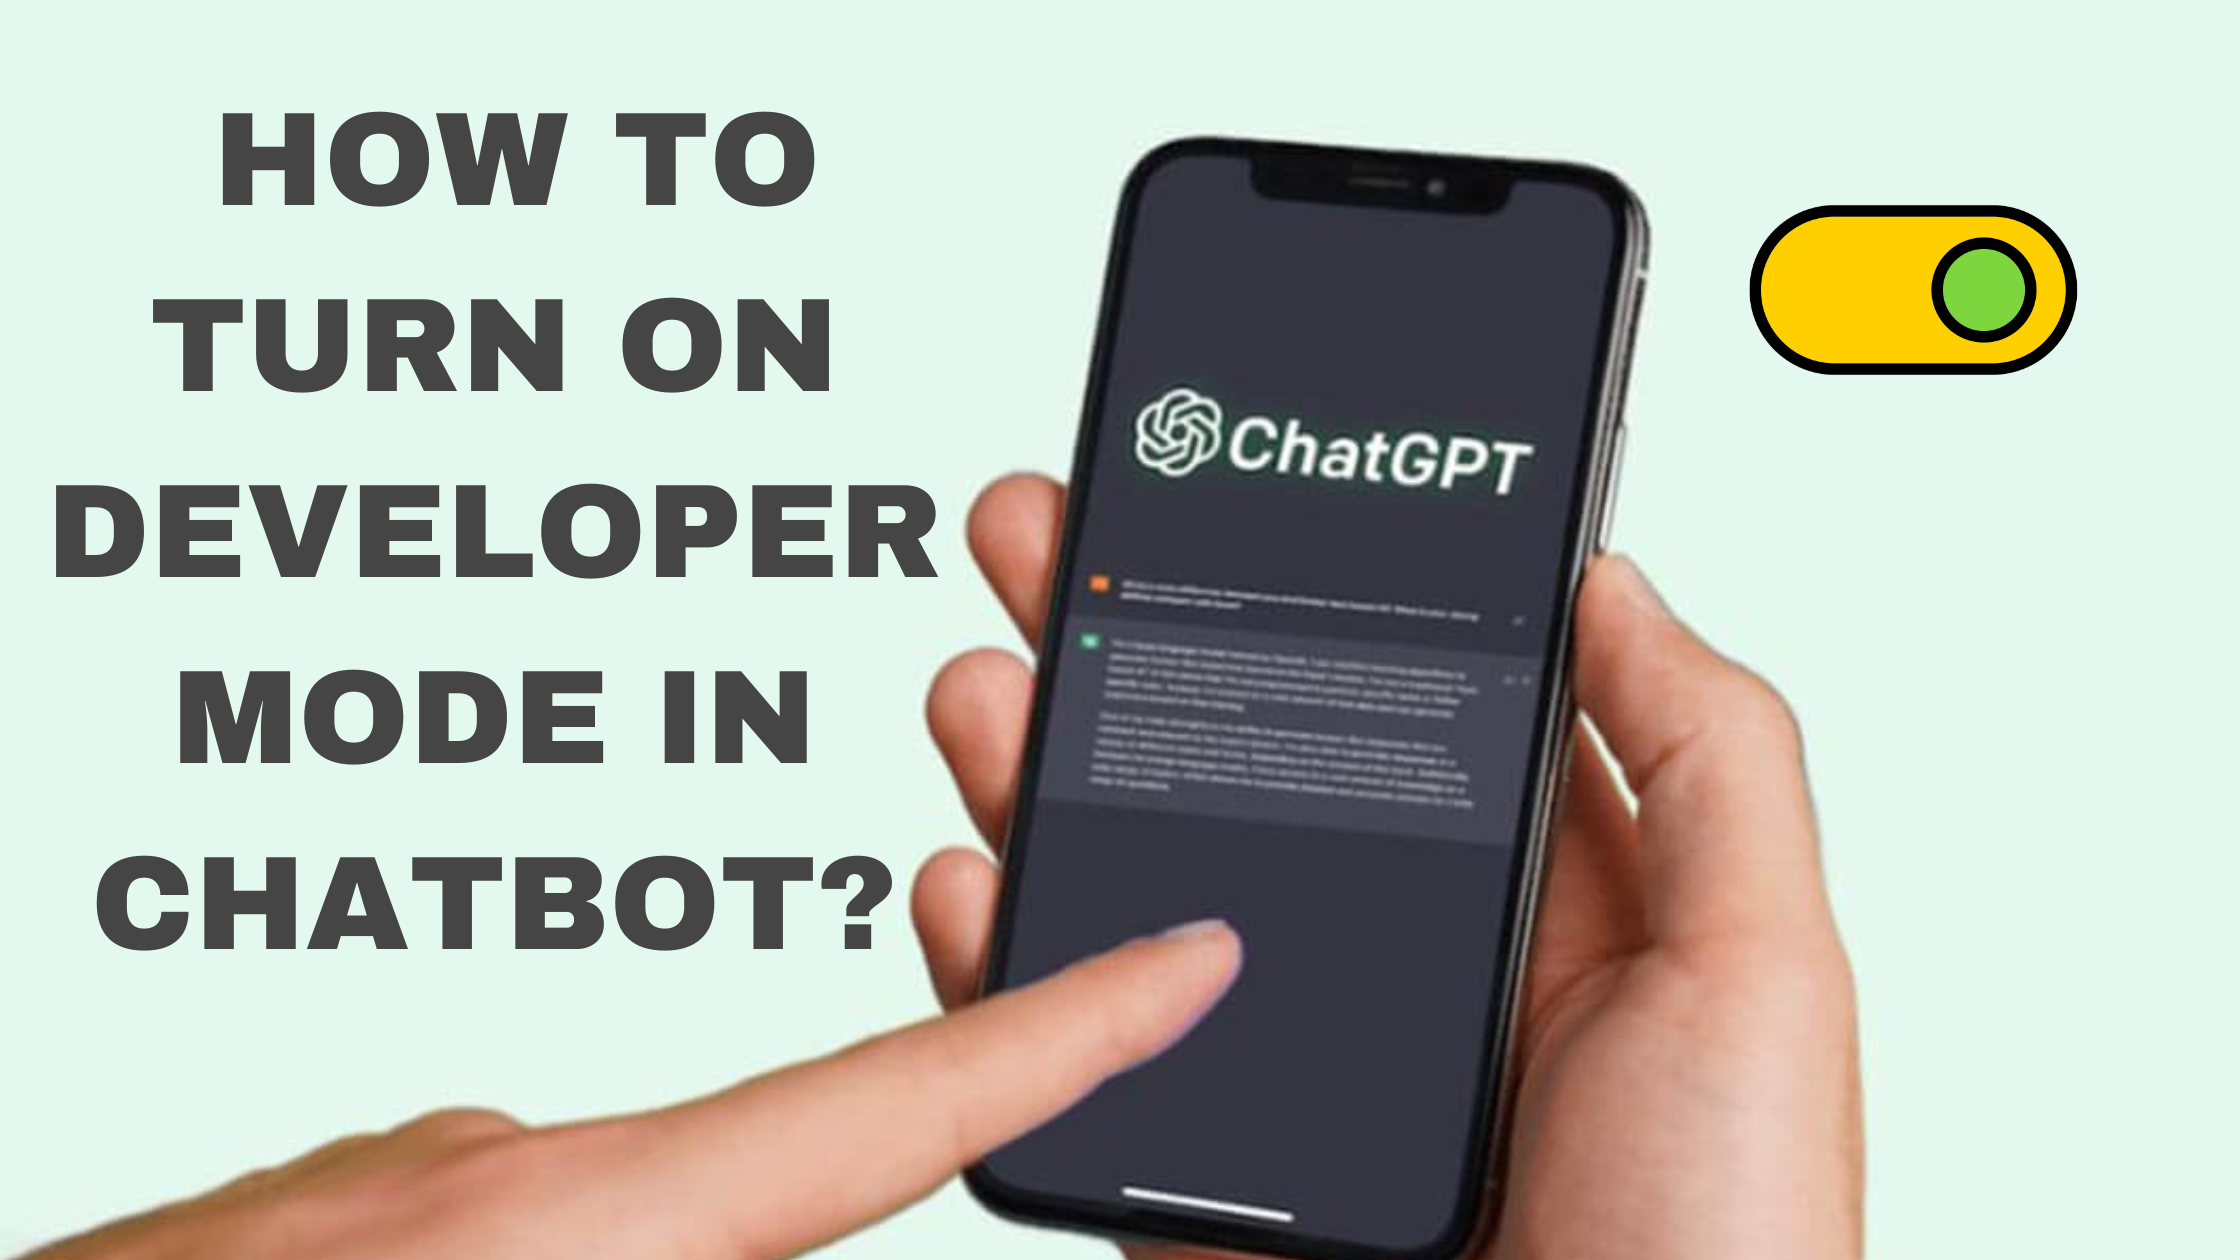 How to Turn ON Developer Mode in Chatbot